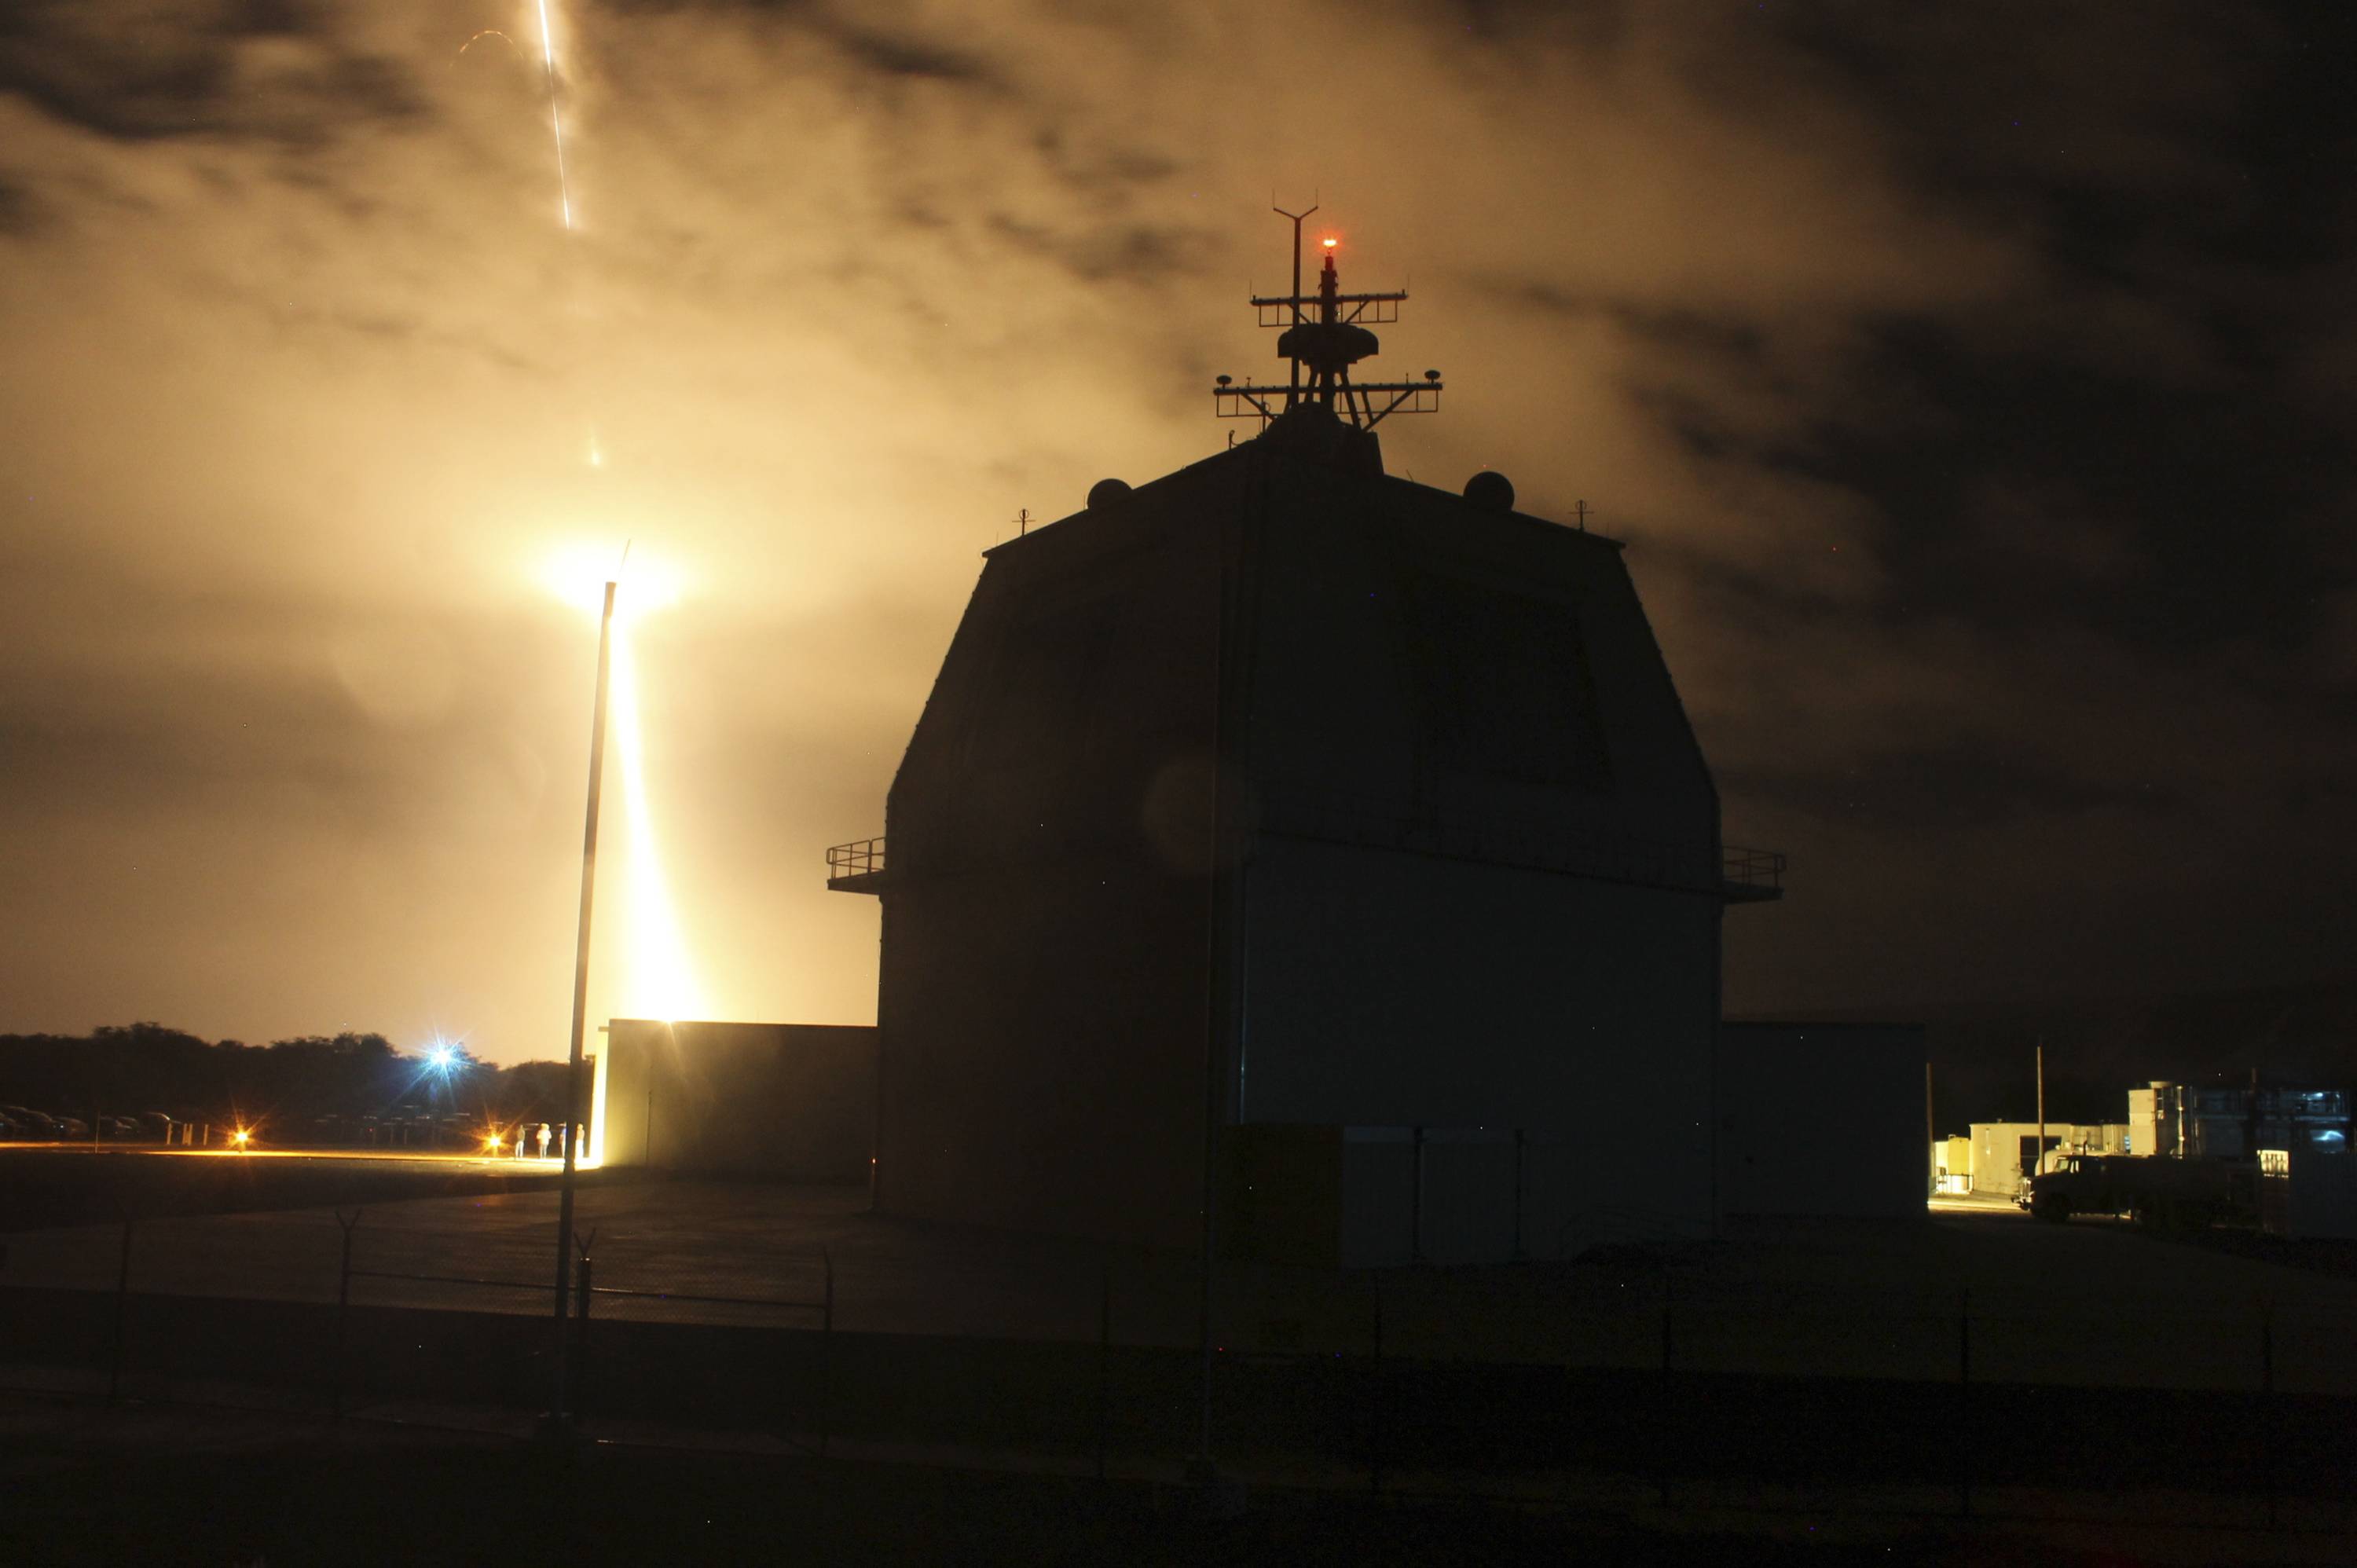 The Missile Defense Agency conducts the first intercept flight test of a land-based Aegis Ballistic Missile Defense weapon system from the Aegis Ashore Missile Defense Test Complex in Kauai, Hawaii, in December 2015. | U.S. MISSILE DEFENSE AGENCY / VIA REUTERS